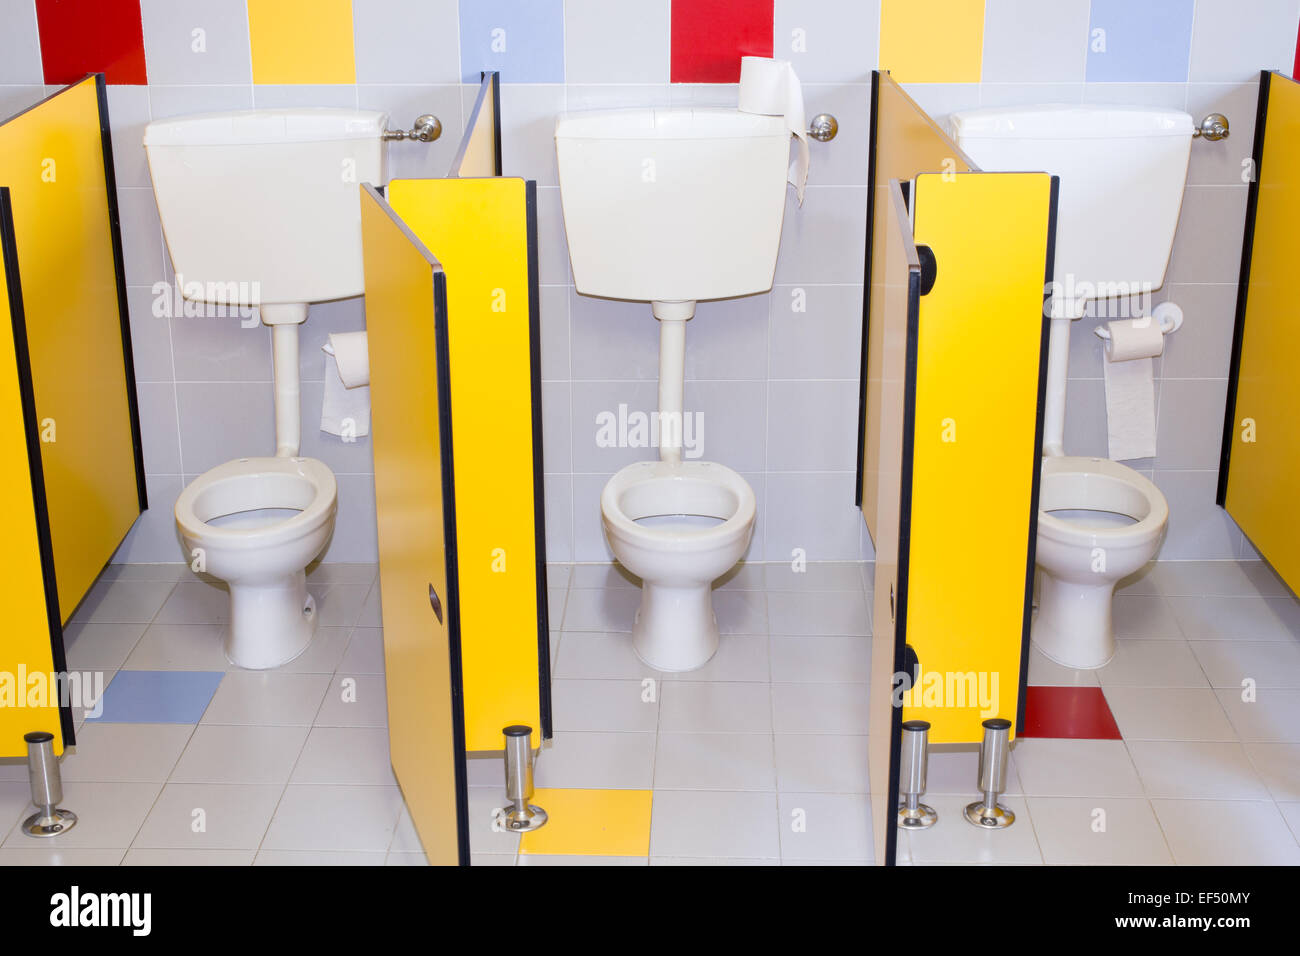 small bathroom of a school for children with water closed Stock Photo